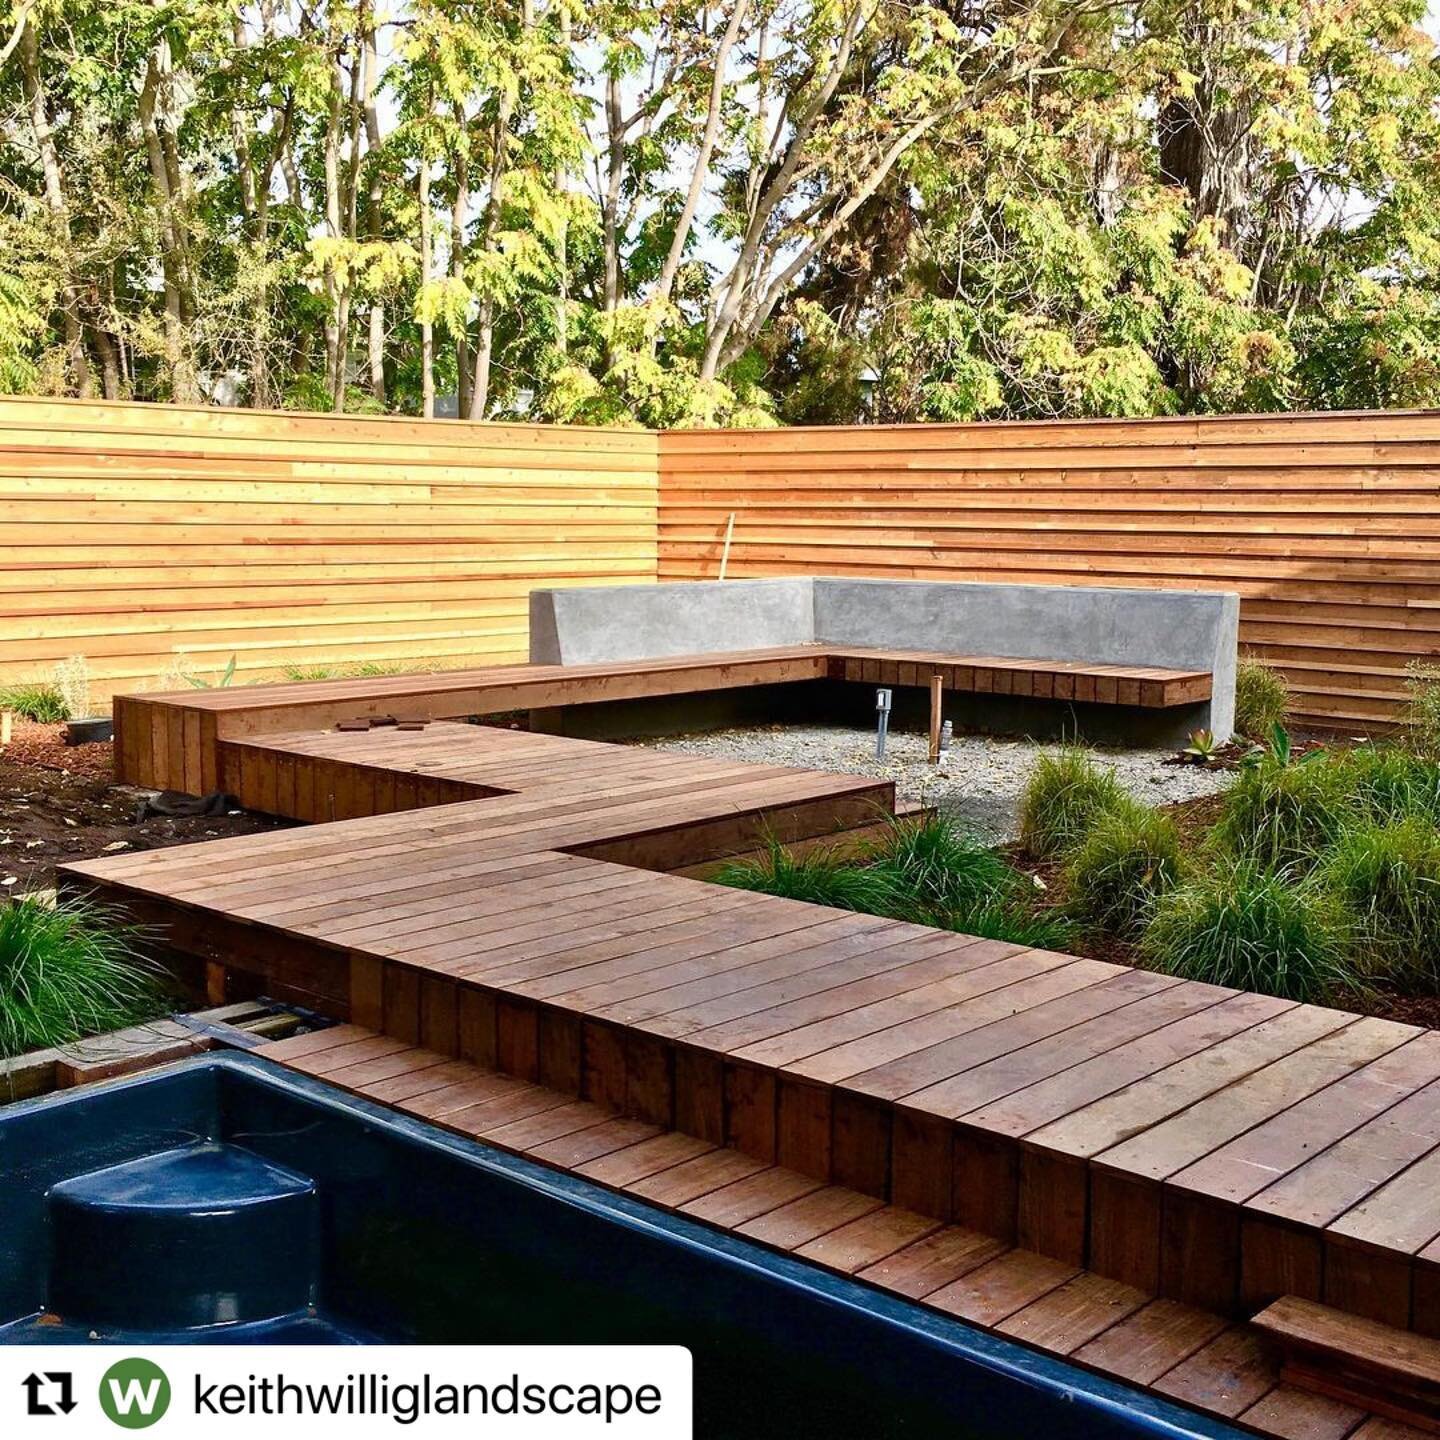 IPE deck, and custom cedar fence looking awesome! 👏 

#landscapearchitecture #firepit #dreamhome #beforeandafter #landscapedesign #contemporarydesign #beauty #landscapeconstruction #californialandscape #construction #customlandscape #luxury #stone #